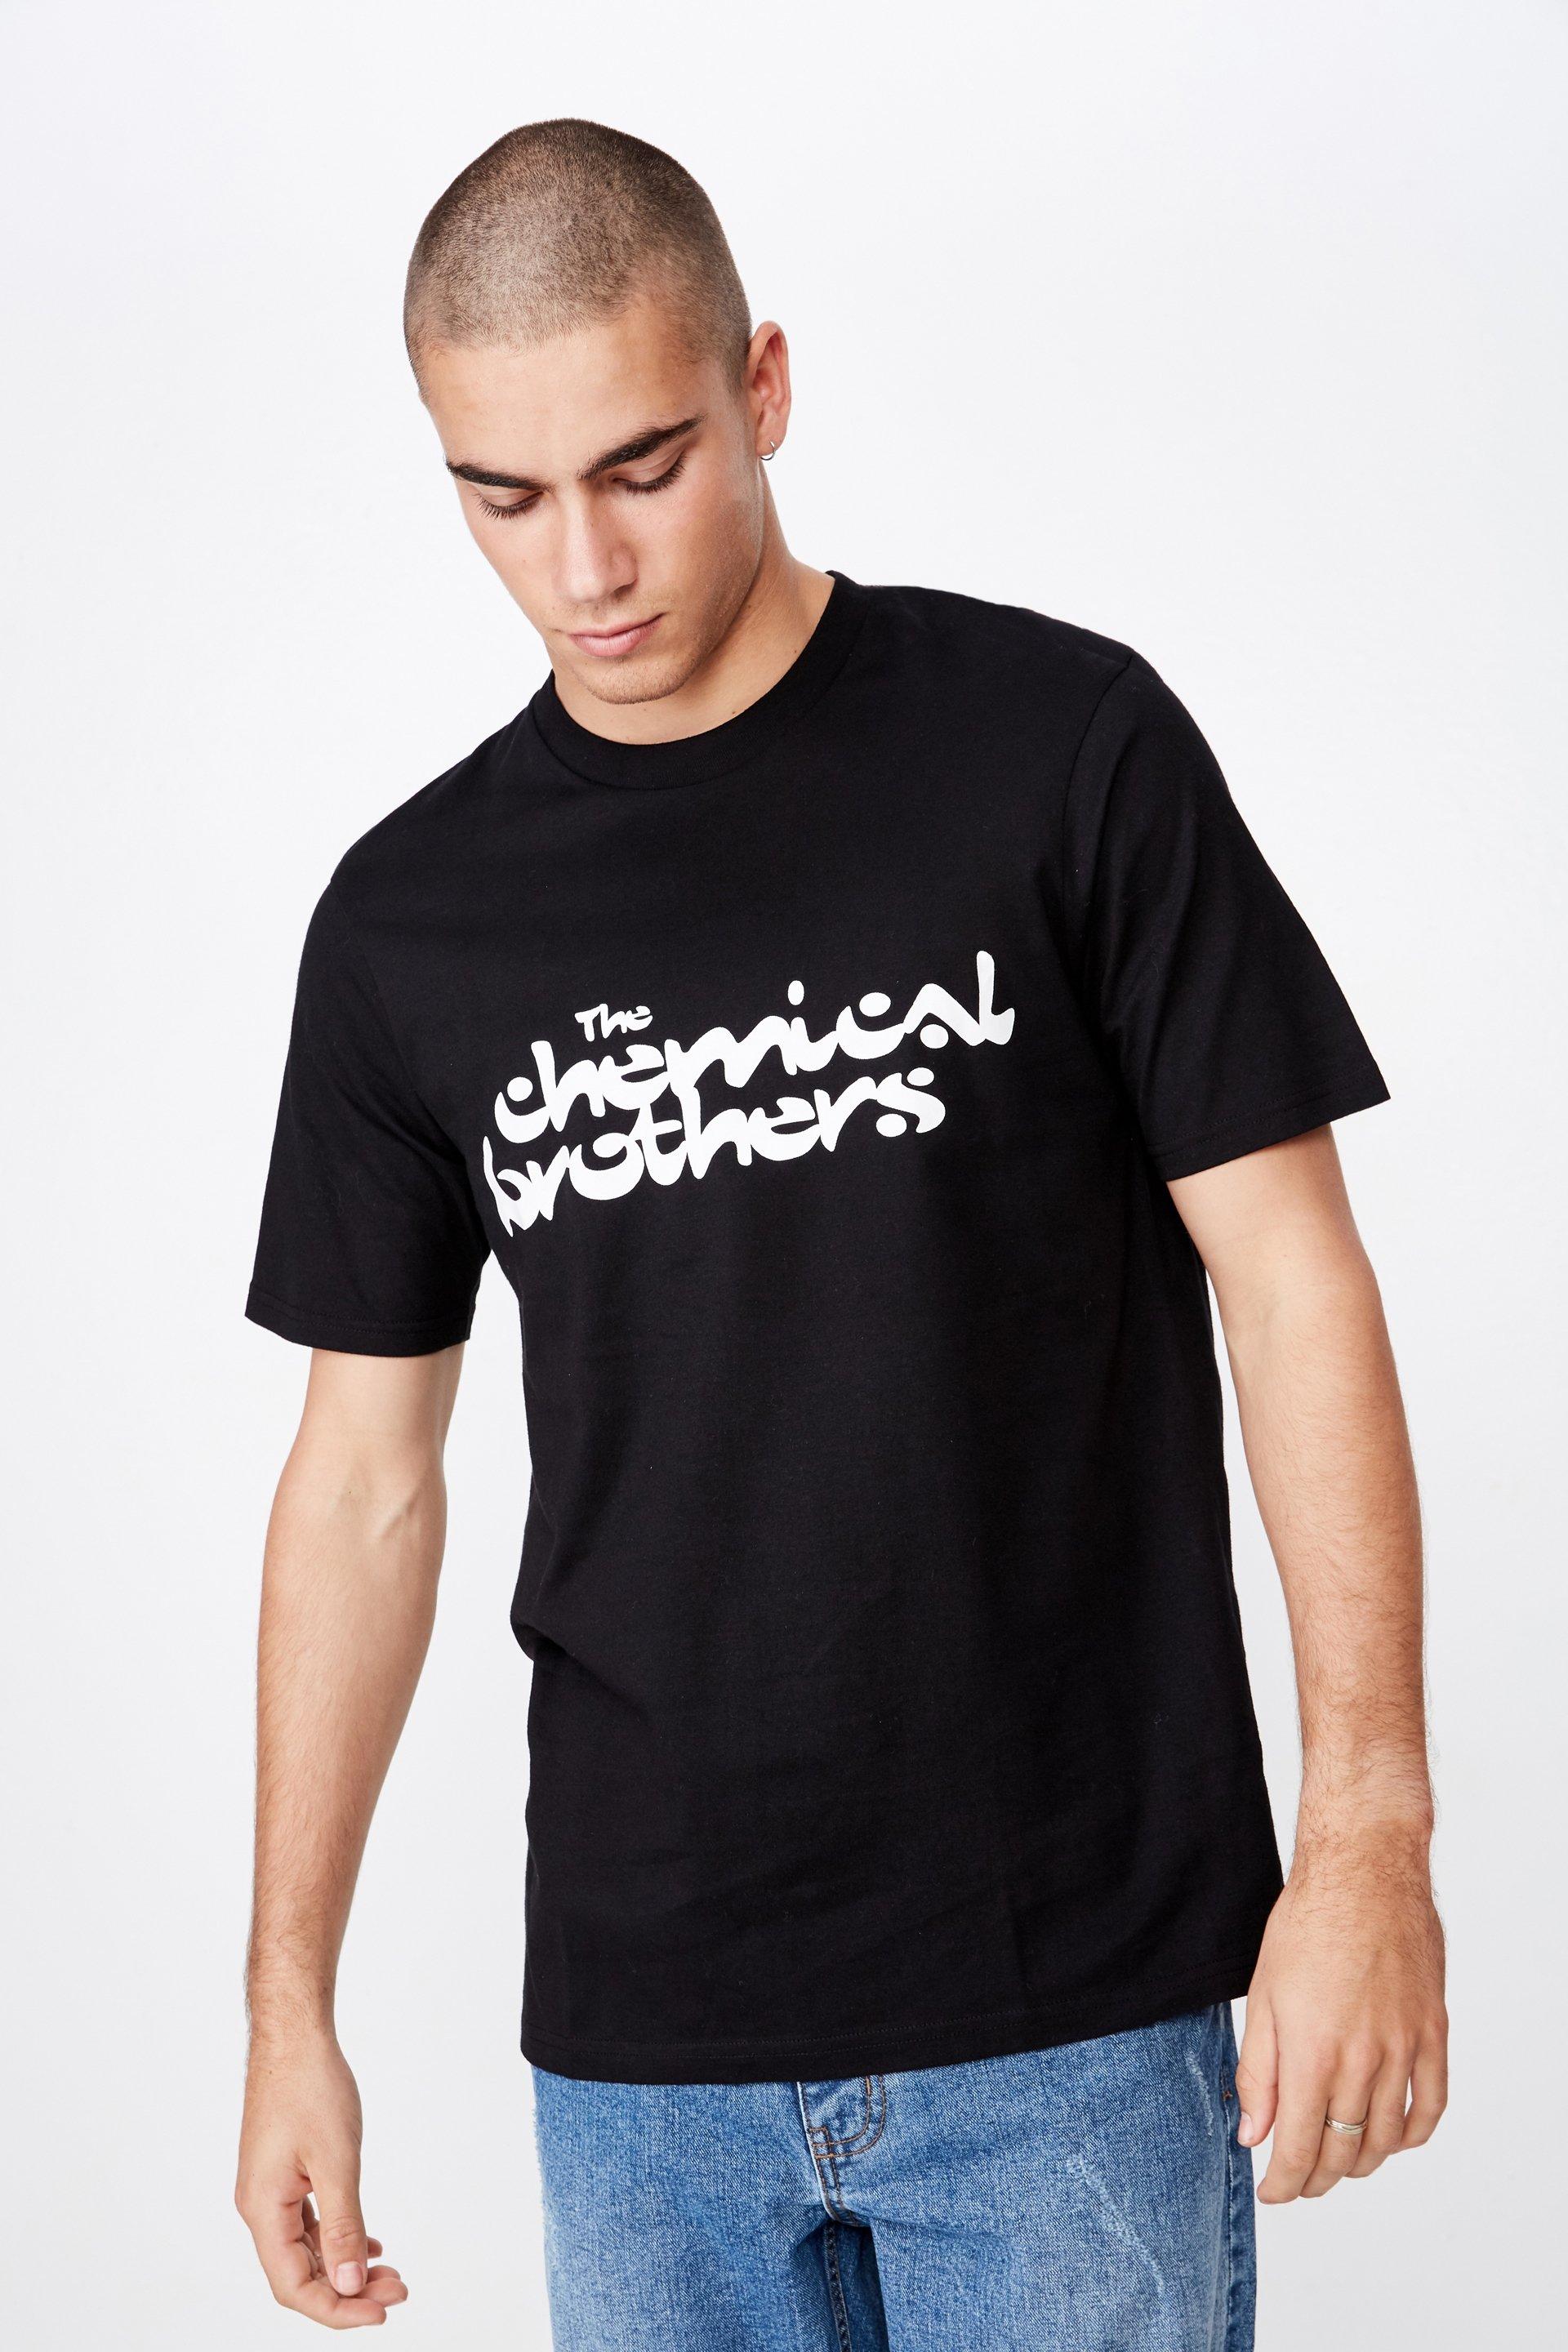 The chemical brothers tee - black Cotton On T-Shirts & Vests ...